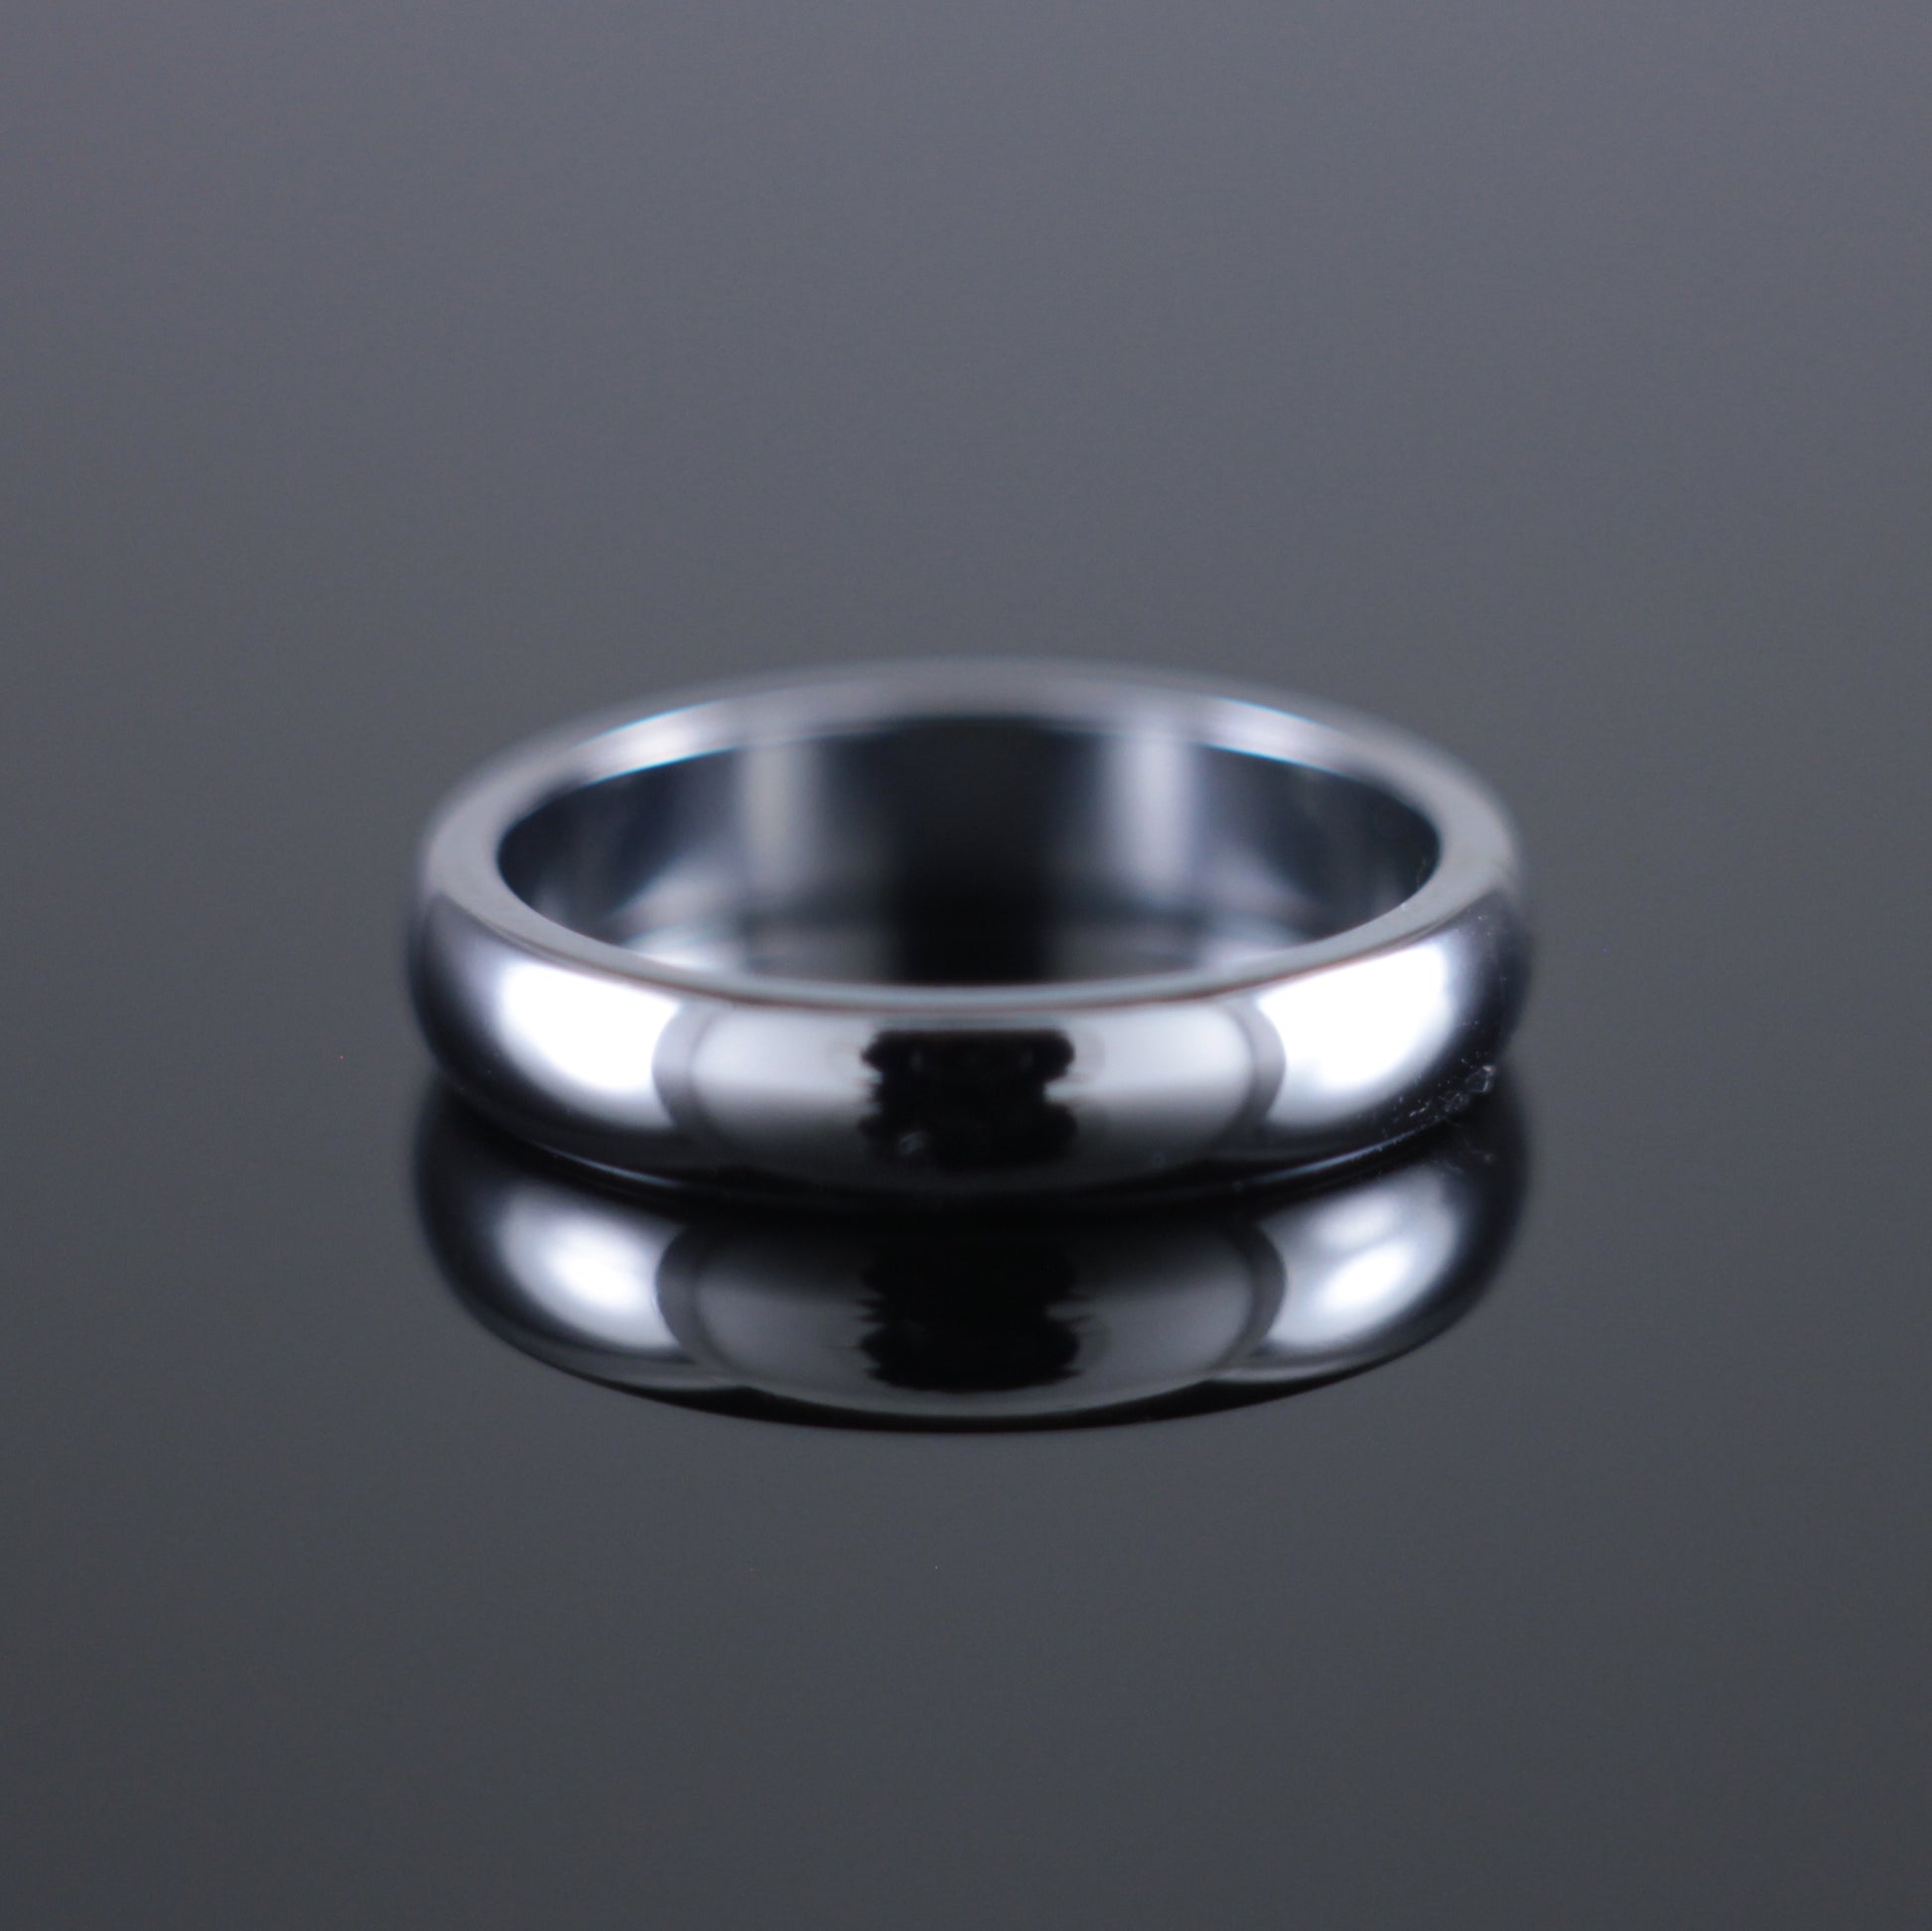 4mm 'D' Profile Band in 18ct White Gold